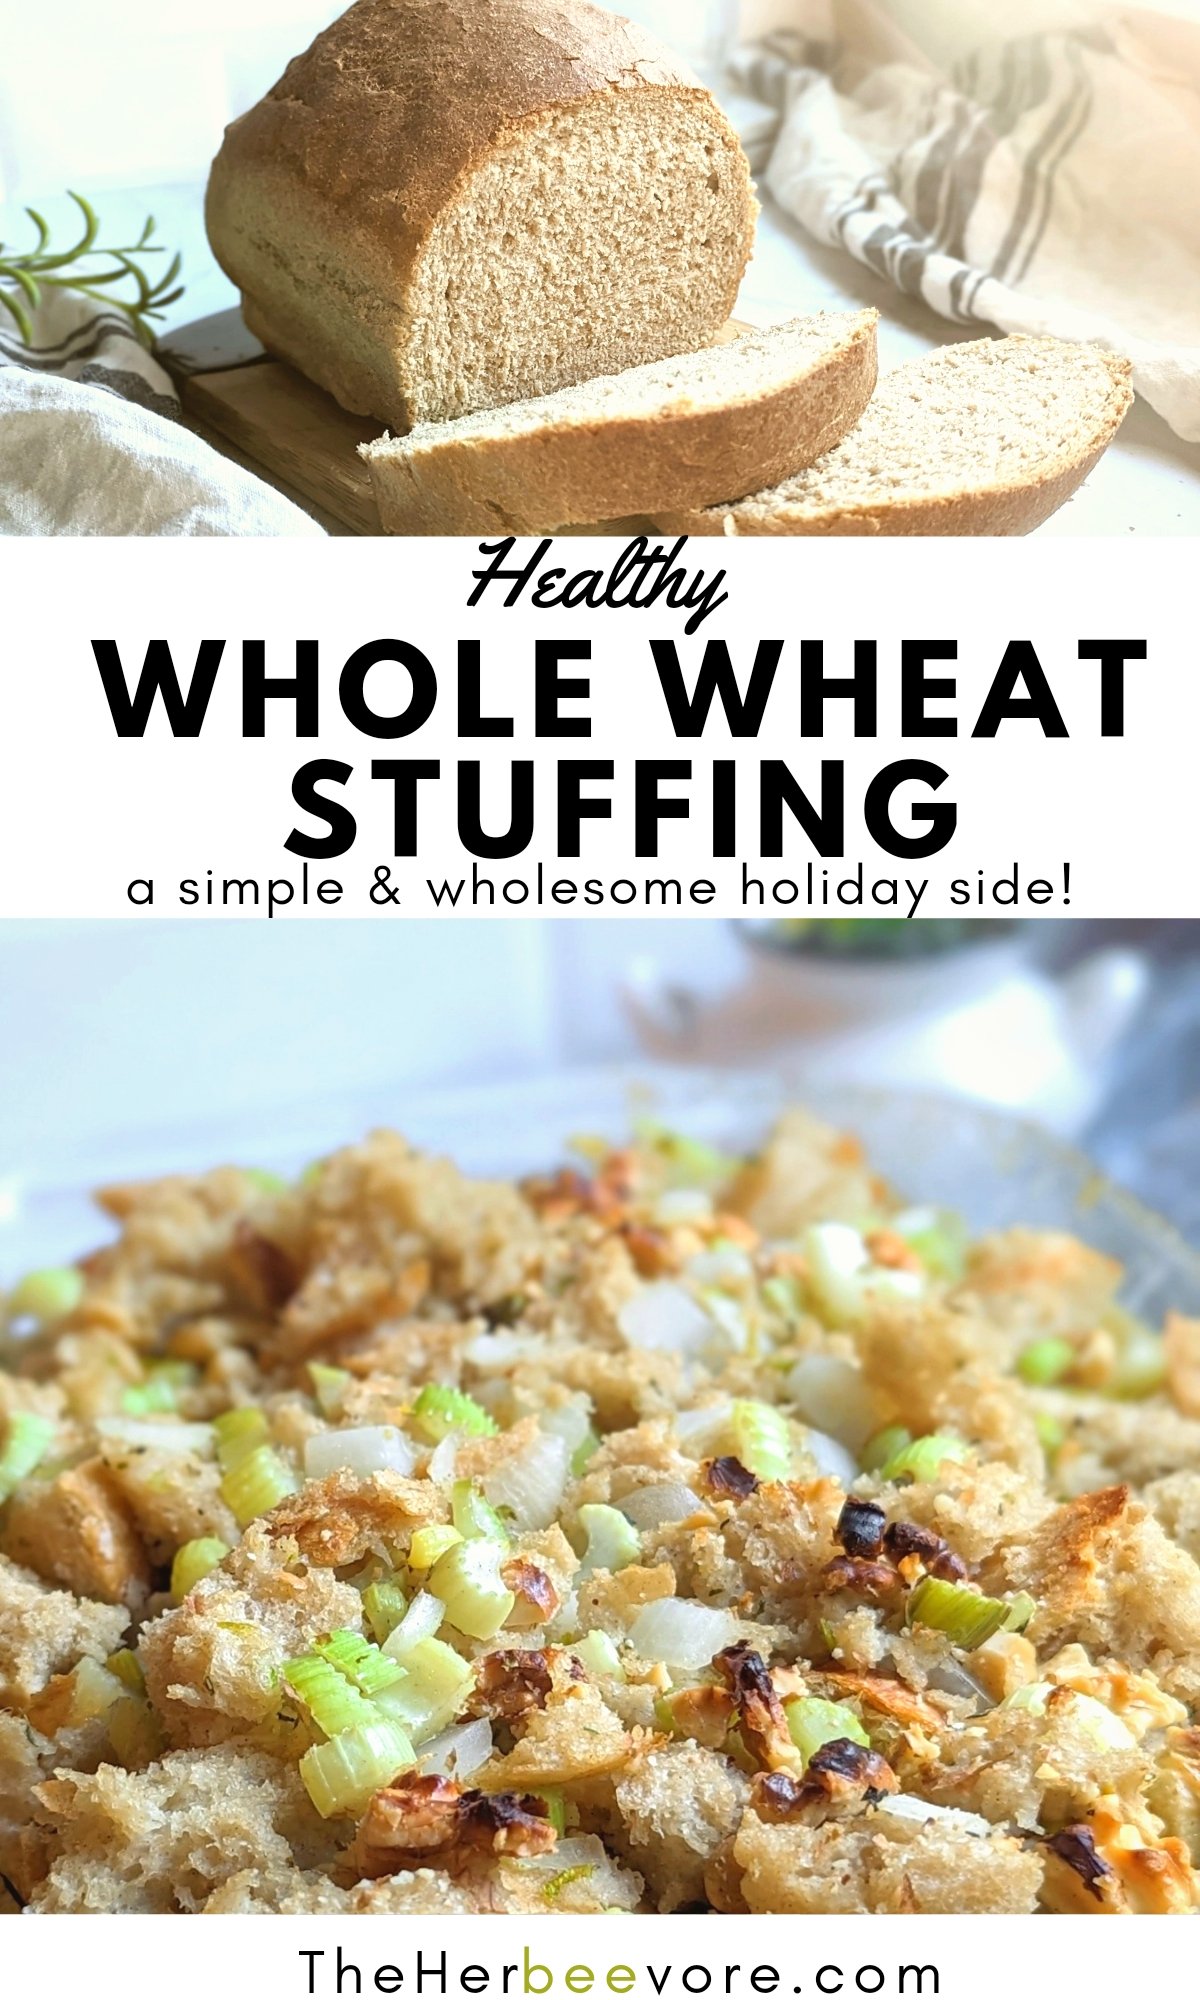 whole wheat stuffing recipe healthy easy homemade stuffing from scratch in a turkey or by itself